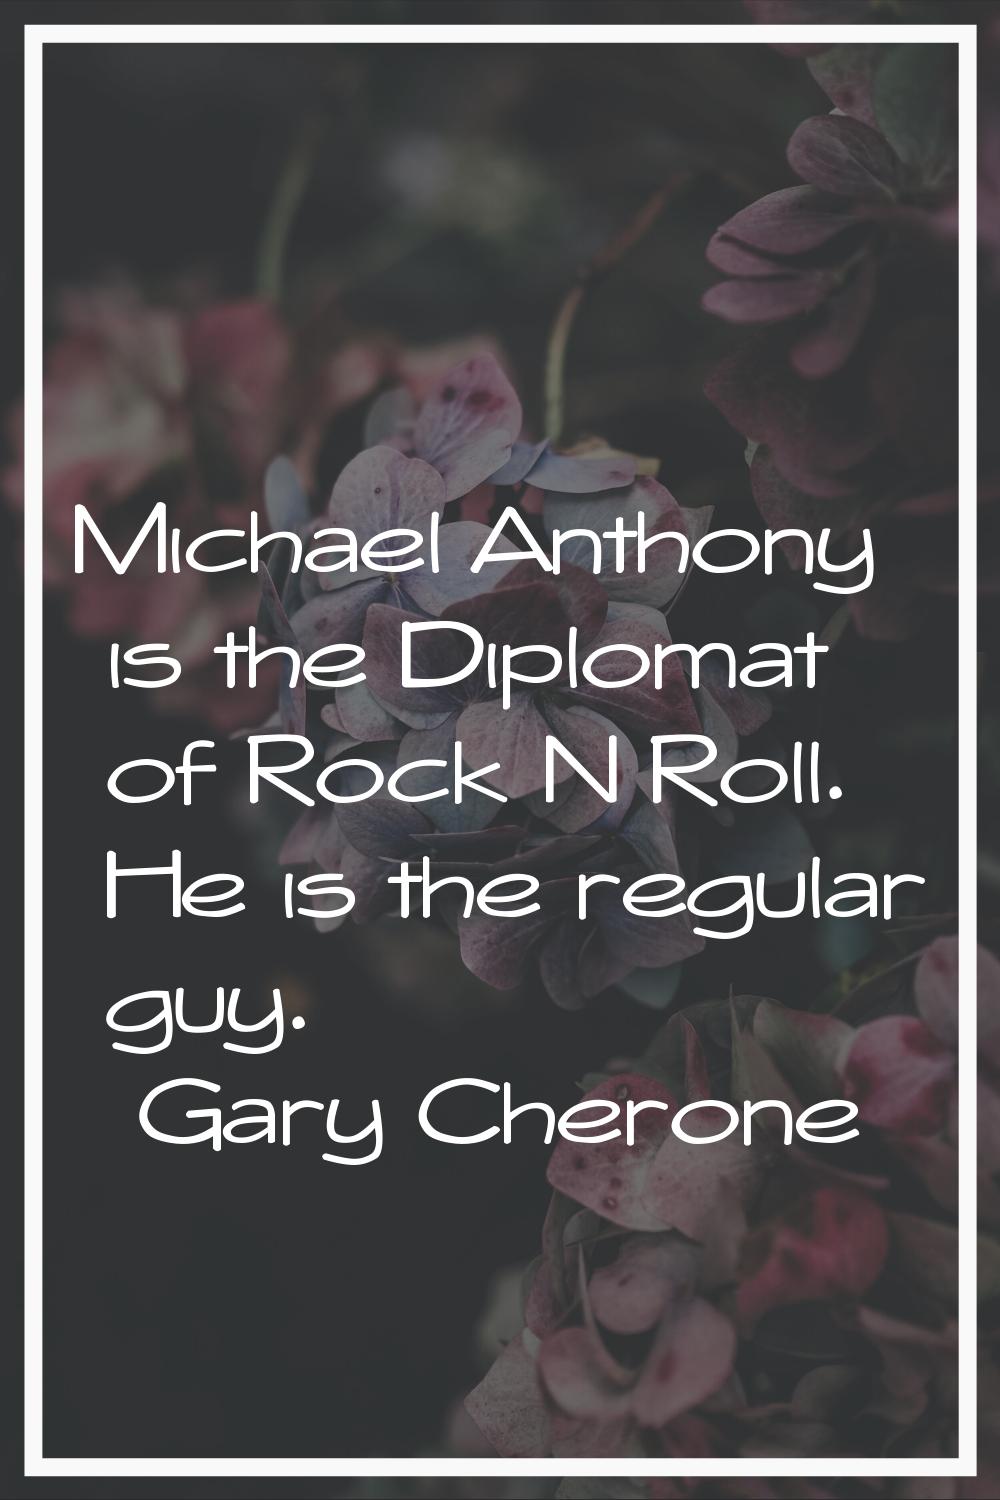 Michael Anthony is the Diplomat of Rock N Roll. He is the regular guy.